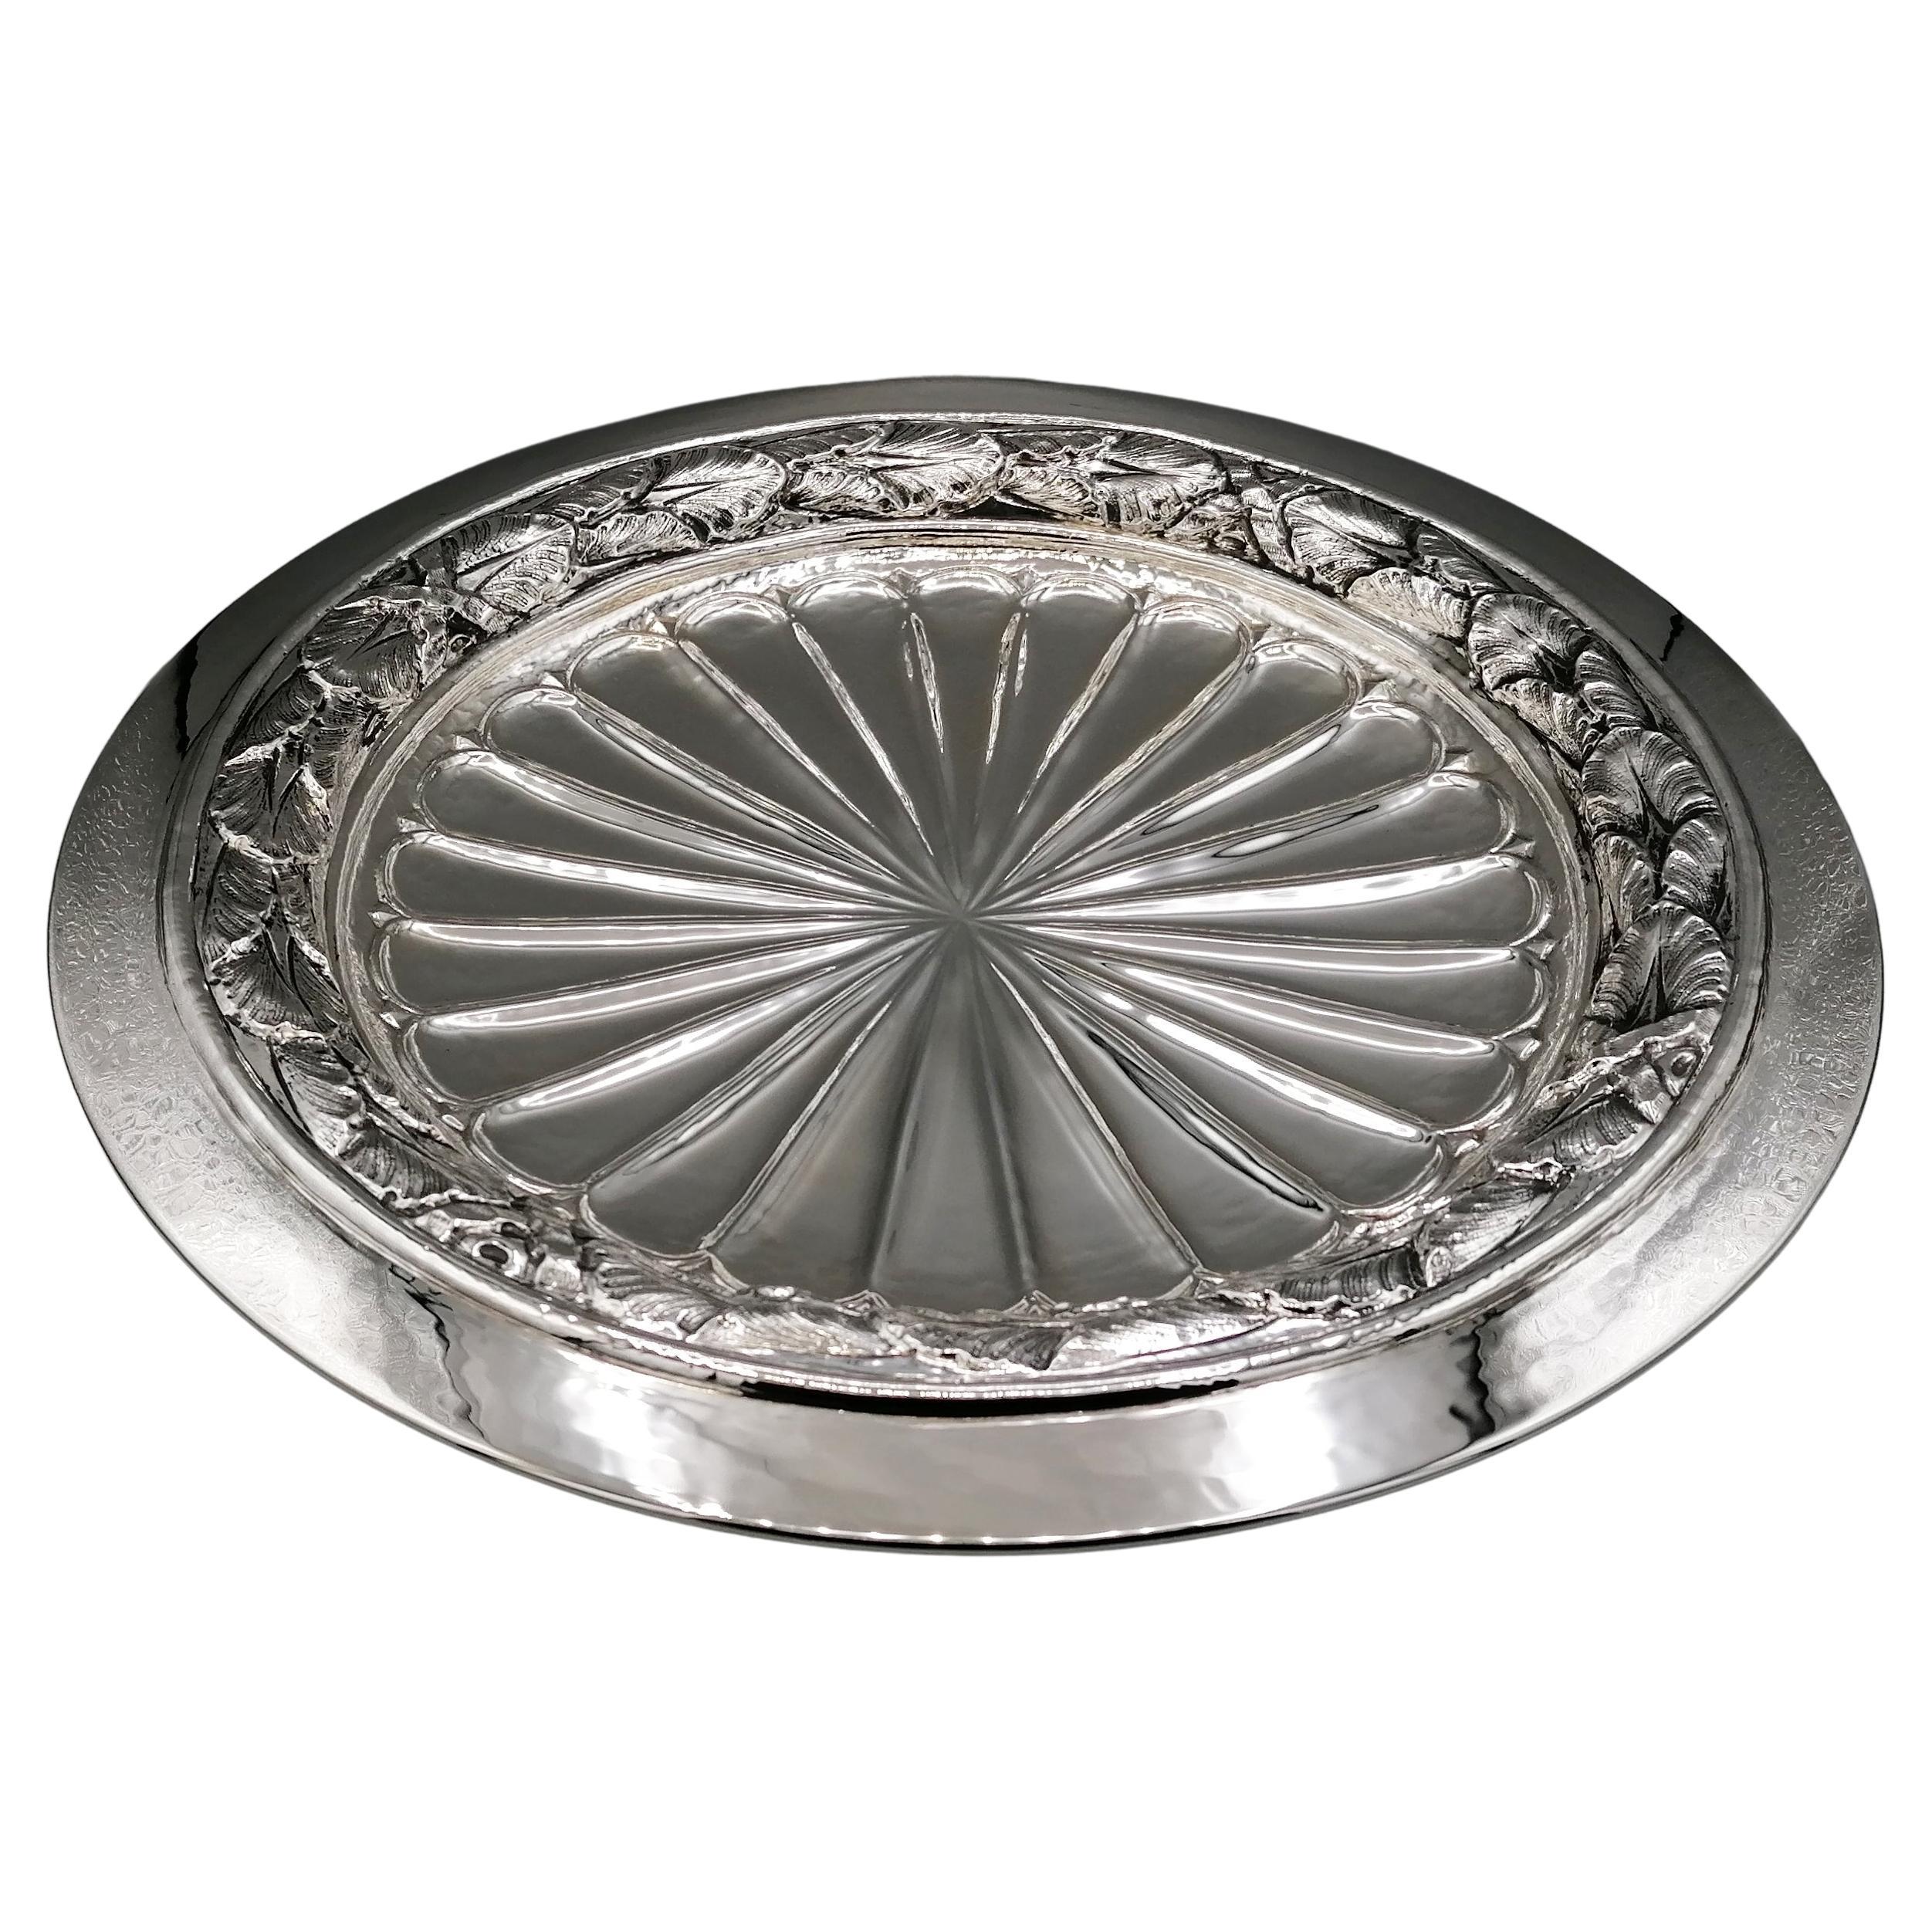 21th Century Italian Sterling Silver Empire Style Centerpiece Dish on Feet  For Sale